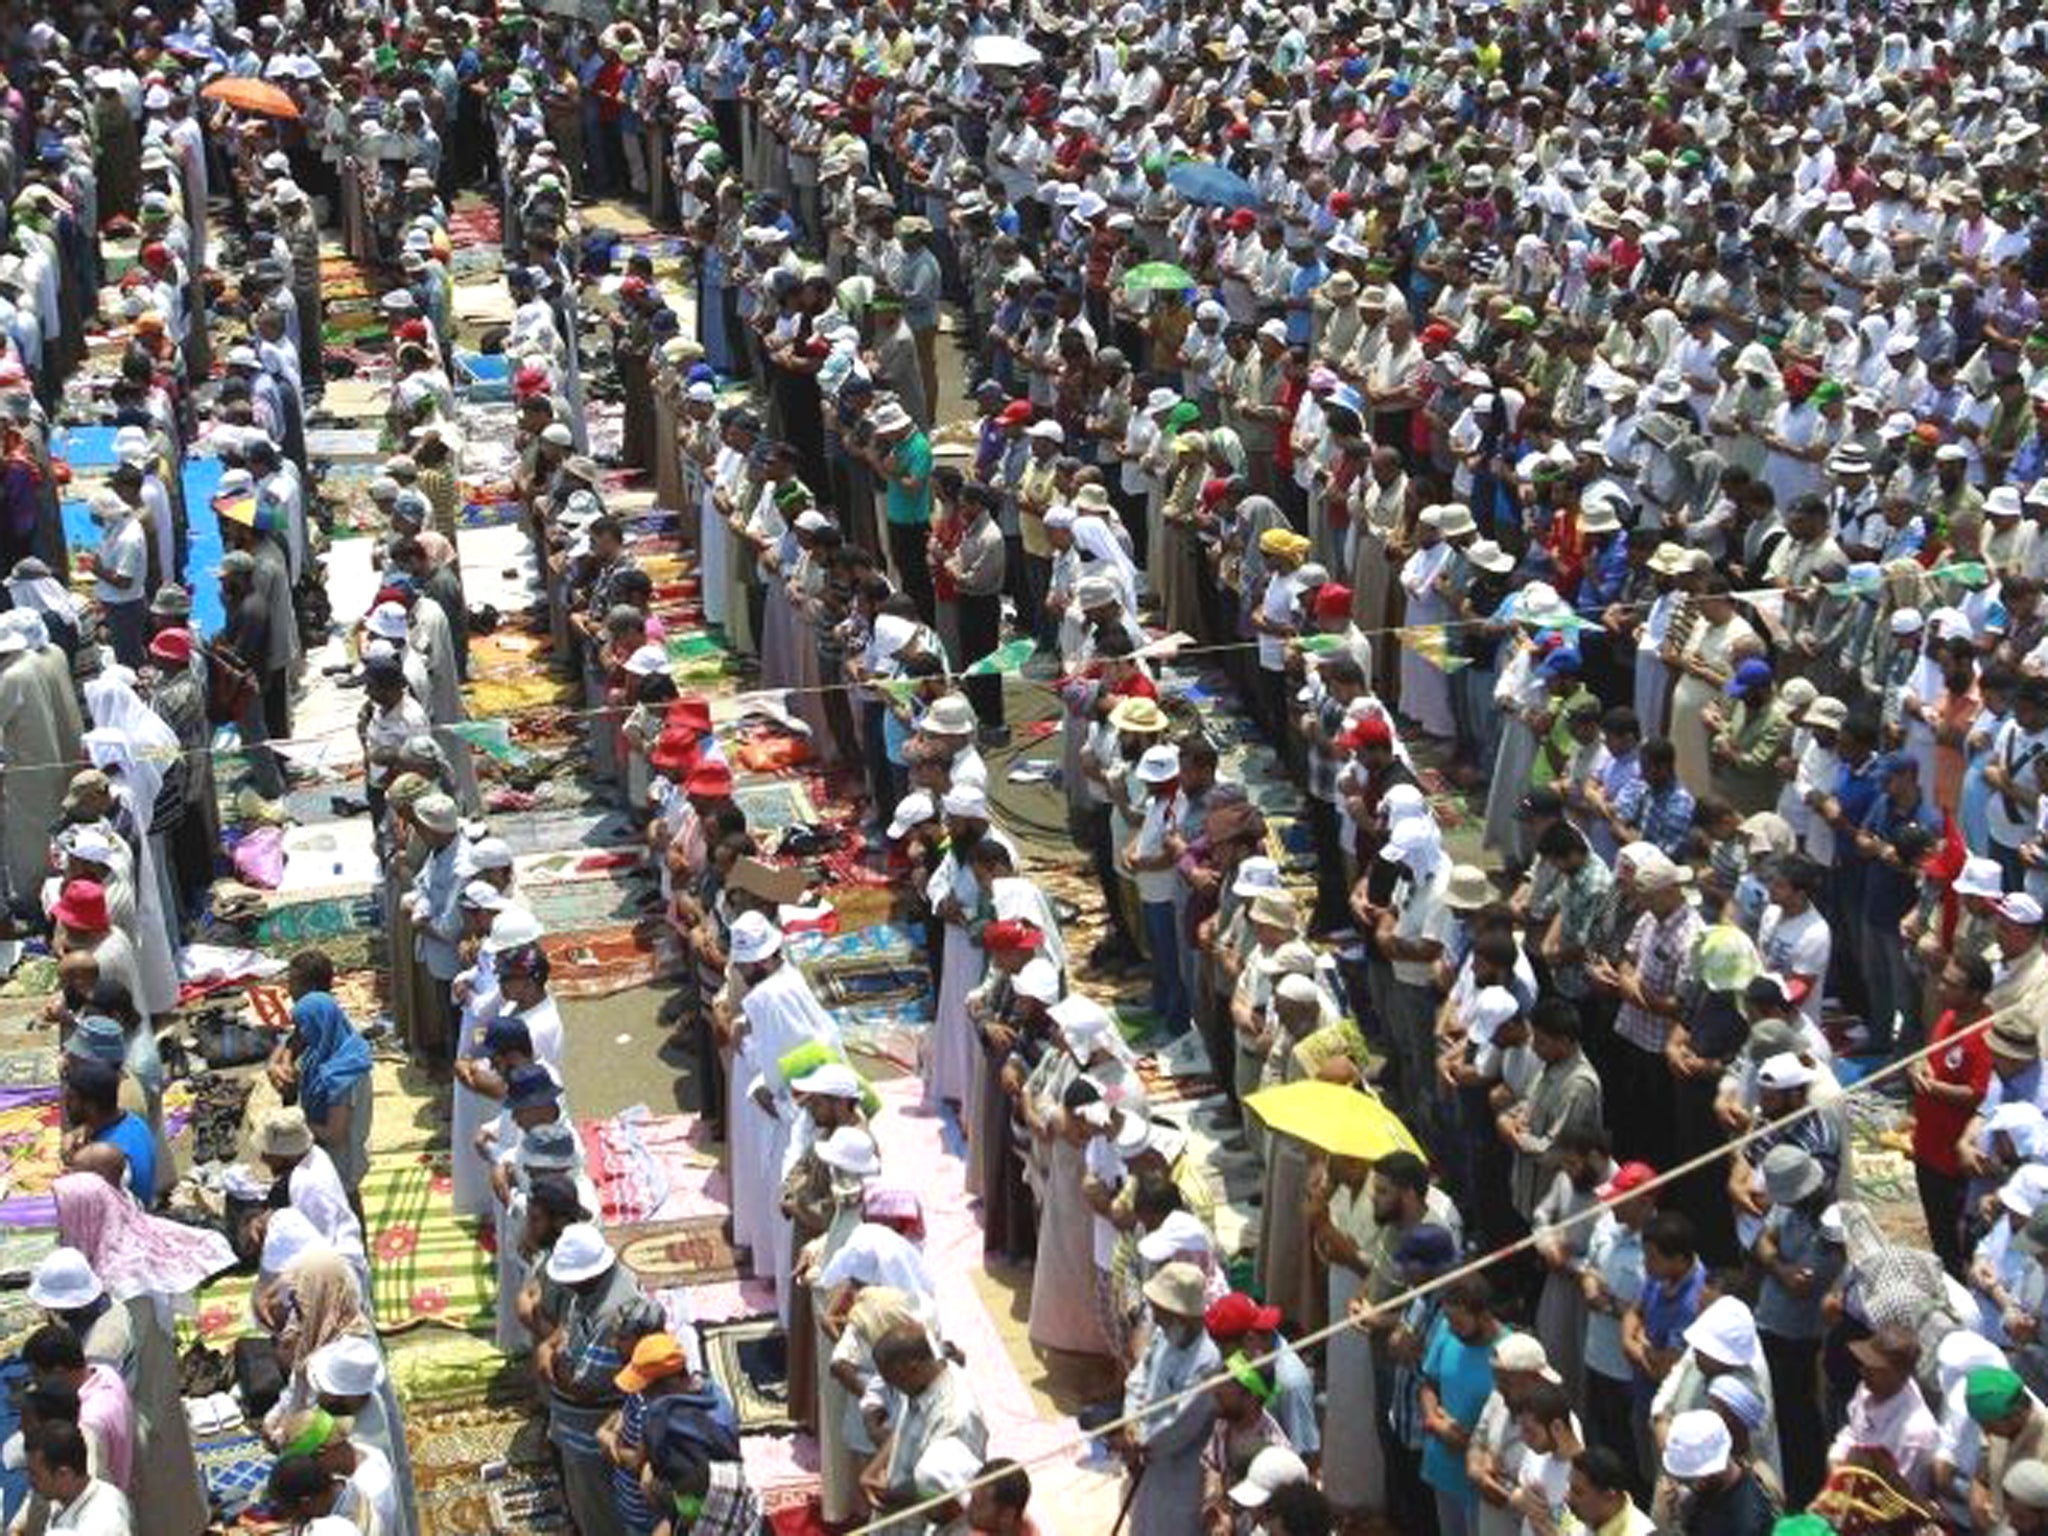 Supporters of ousted President Mohamed Morsi perform weekly Friday prayers at Rabaa Adawiya square, where they are camping, in Cairo